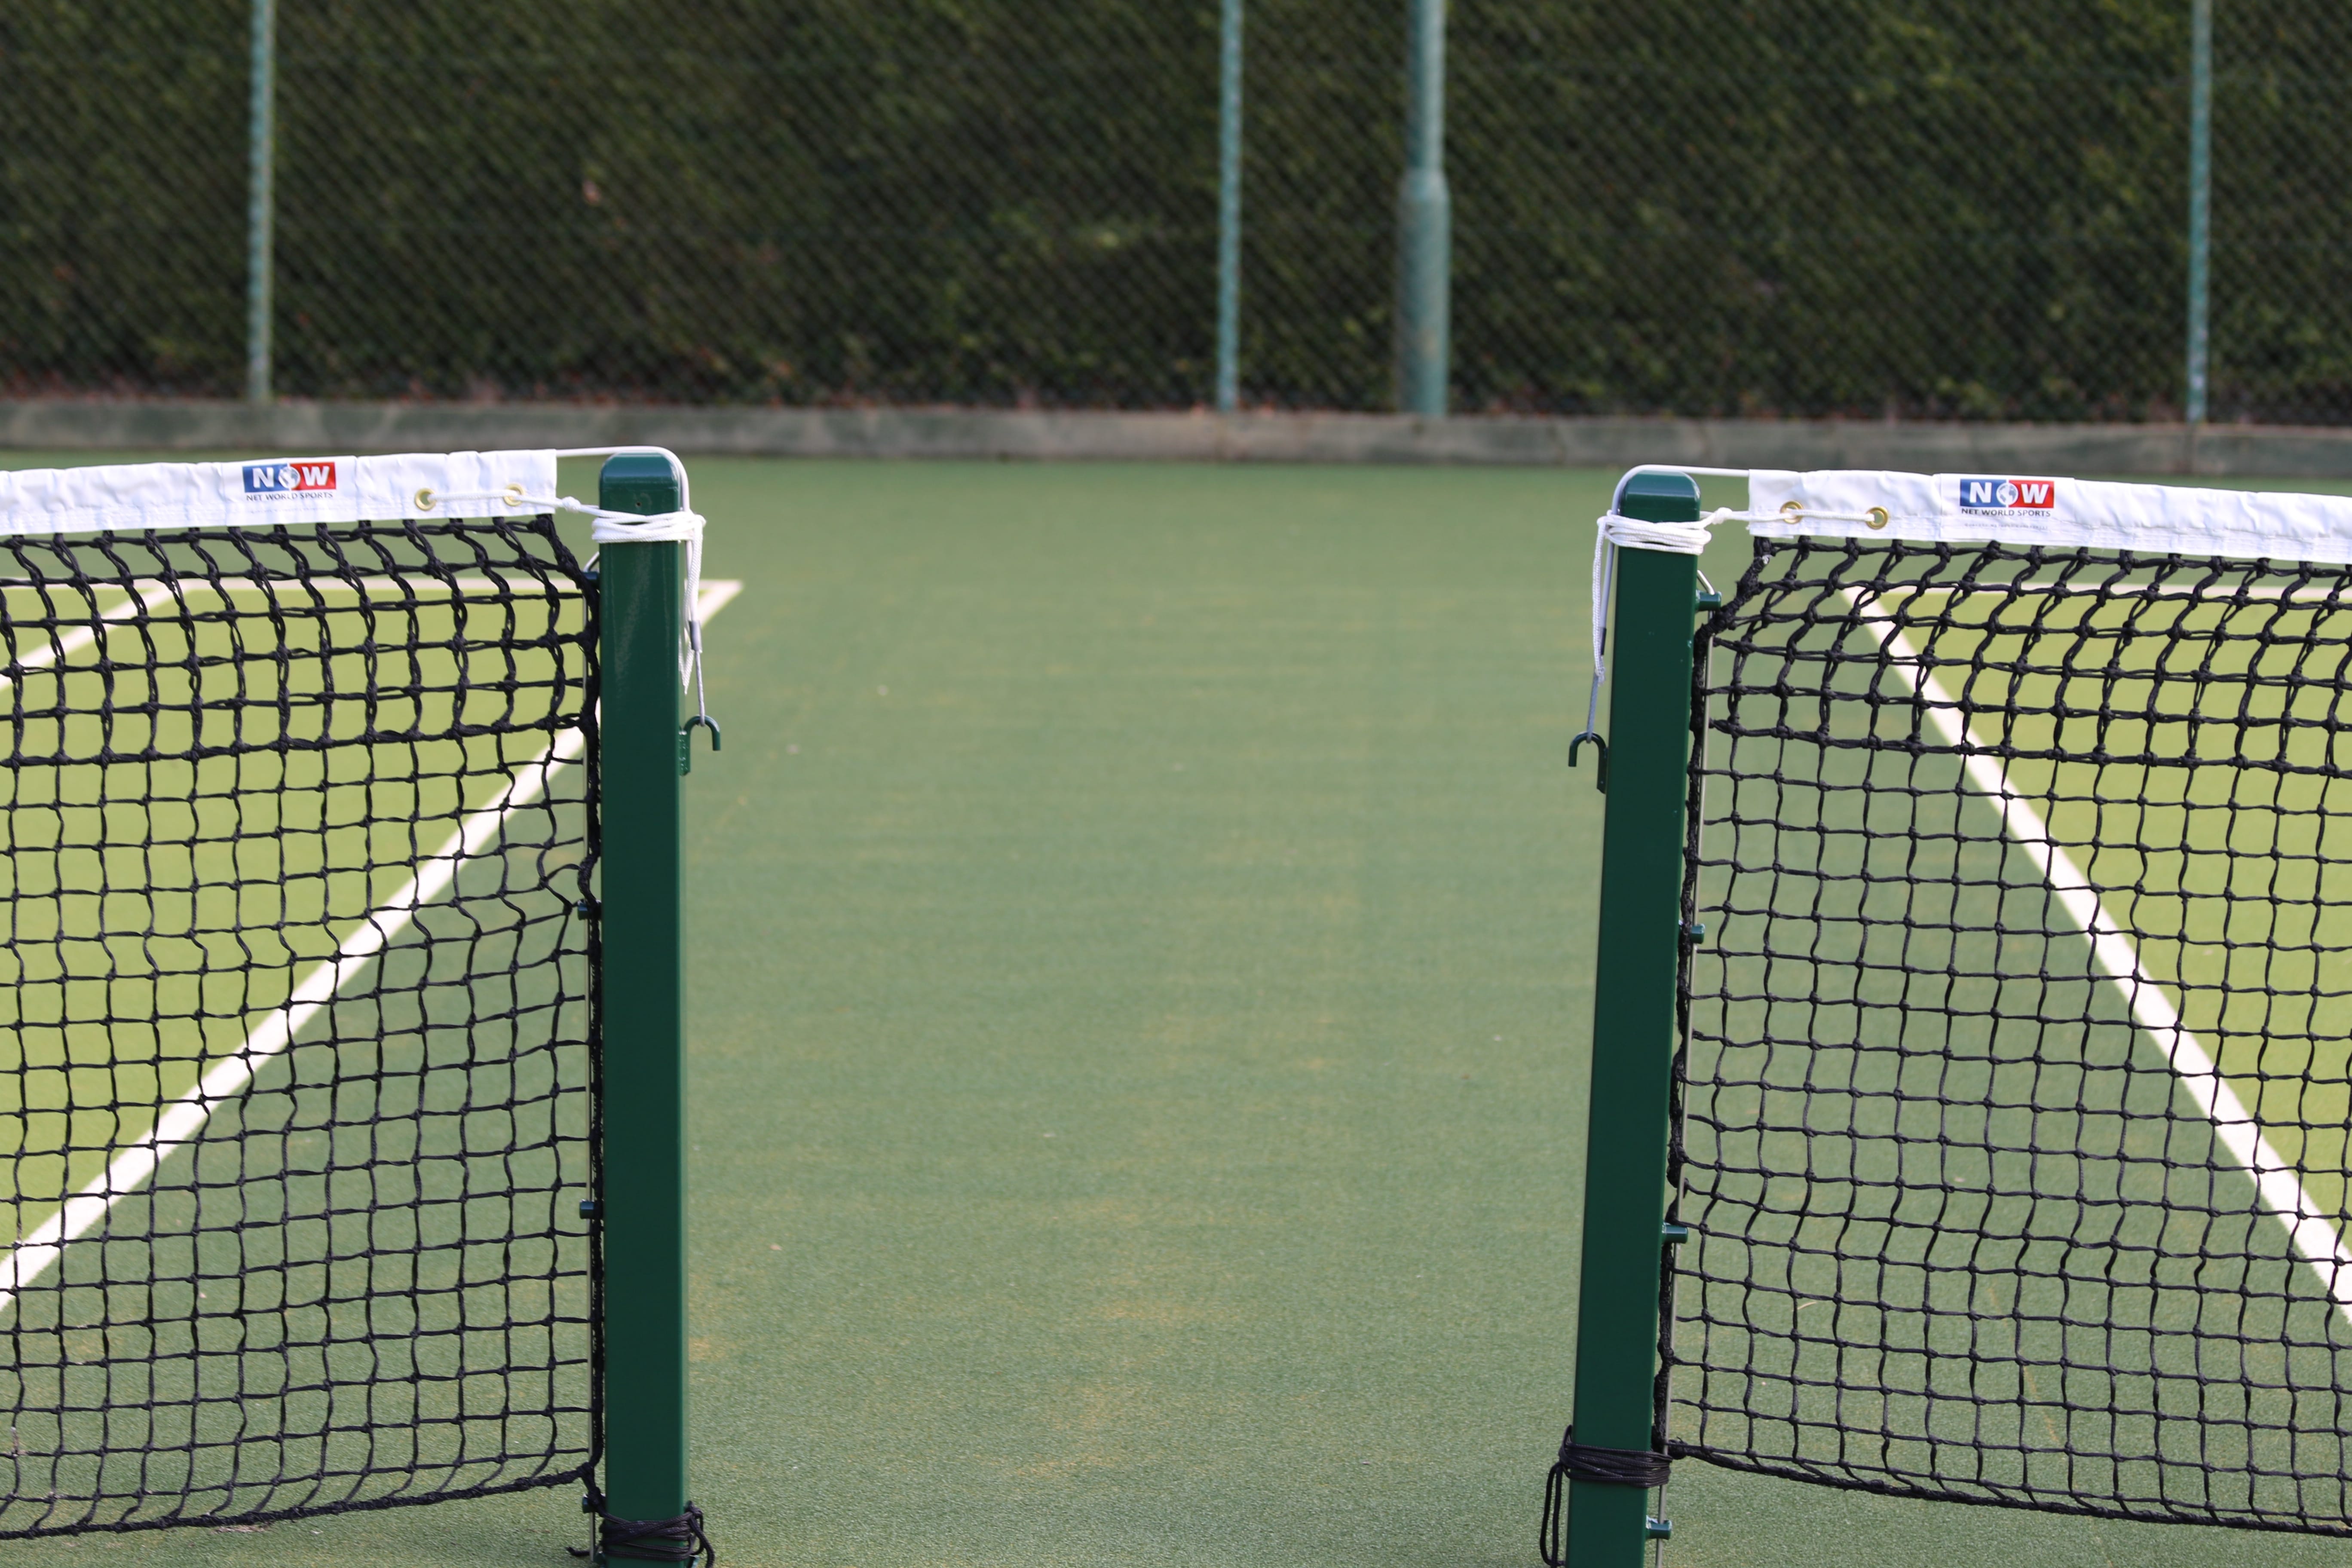 Tennis Court nets at Hutton Rudby